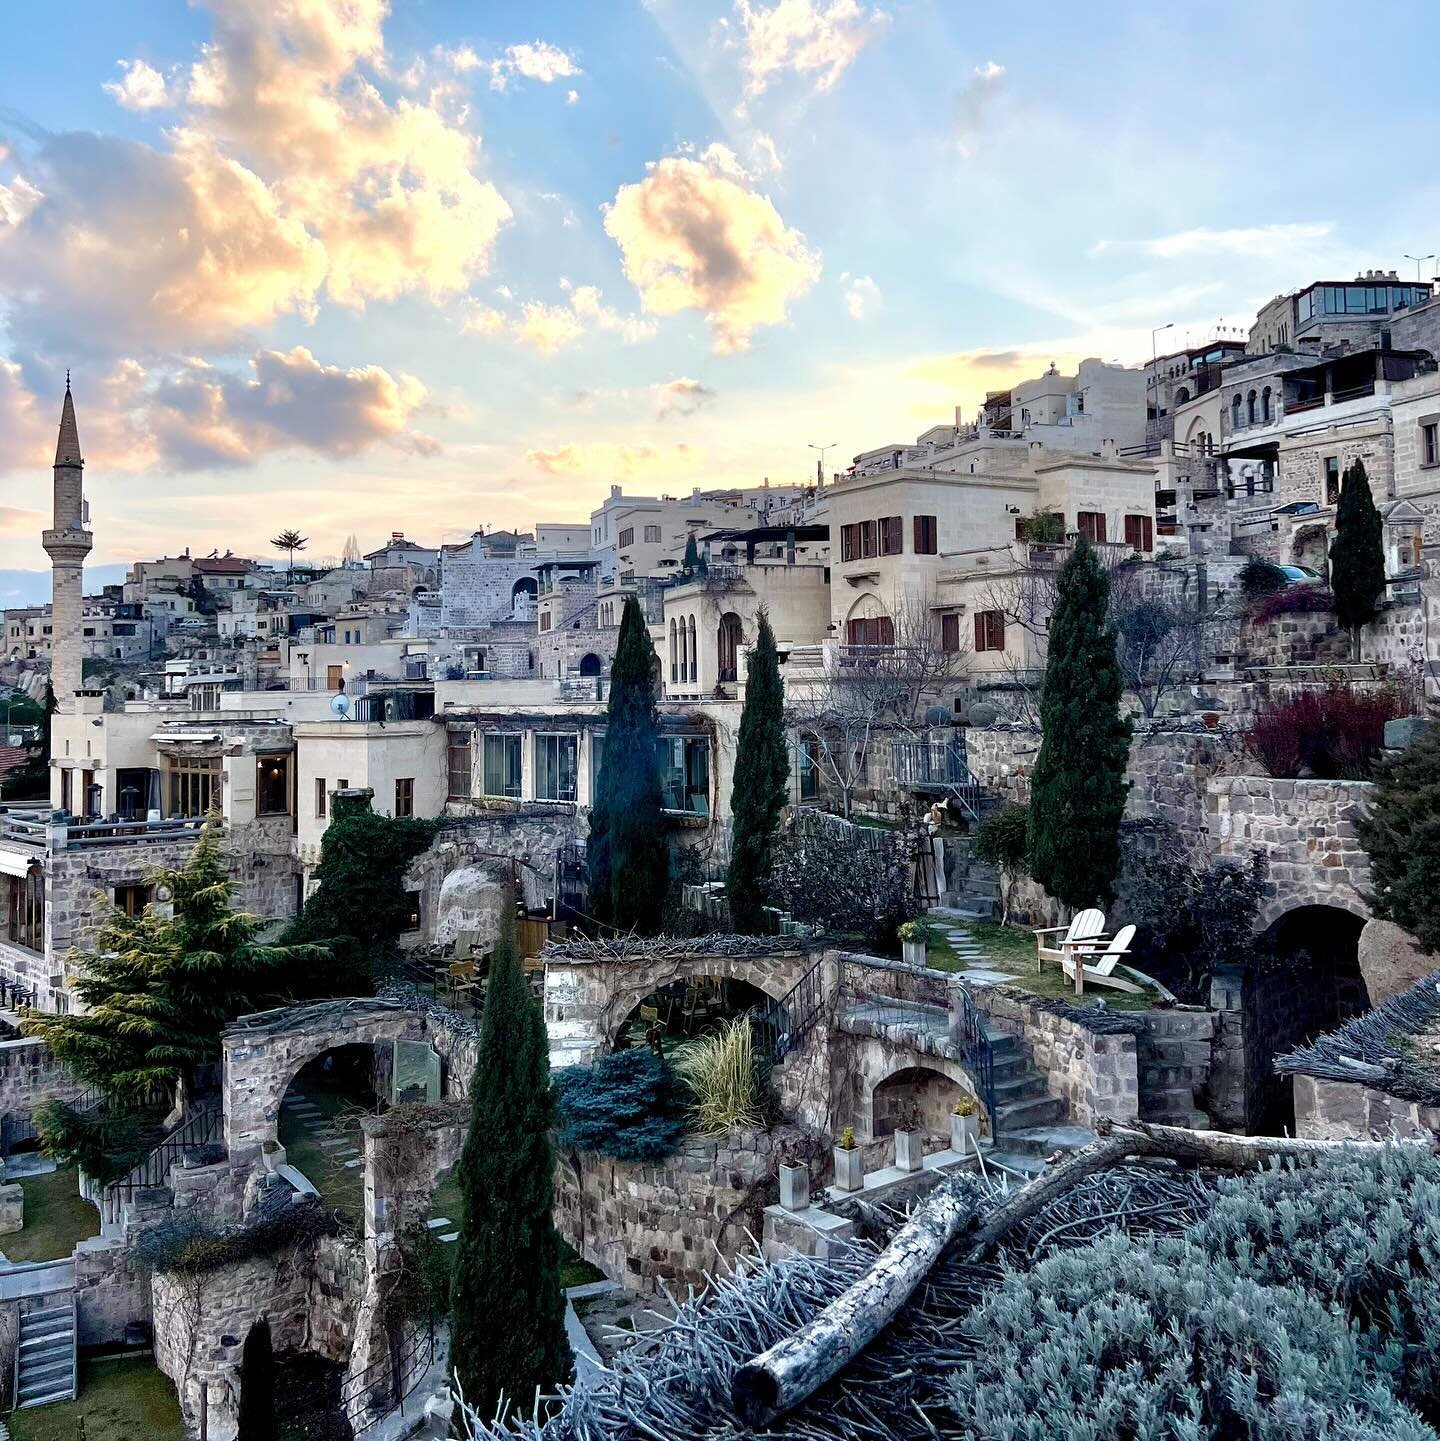 Cappadocia and its surreal landscapes ✨ 

What a wonderful few days spent here learning about how the rock formations (known as fairy chimneys) were created and how they served as places of refuge, as well as learning how local Turkish traditions are